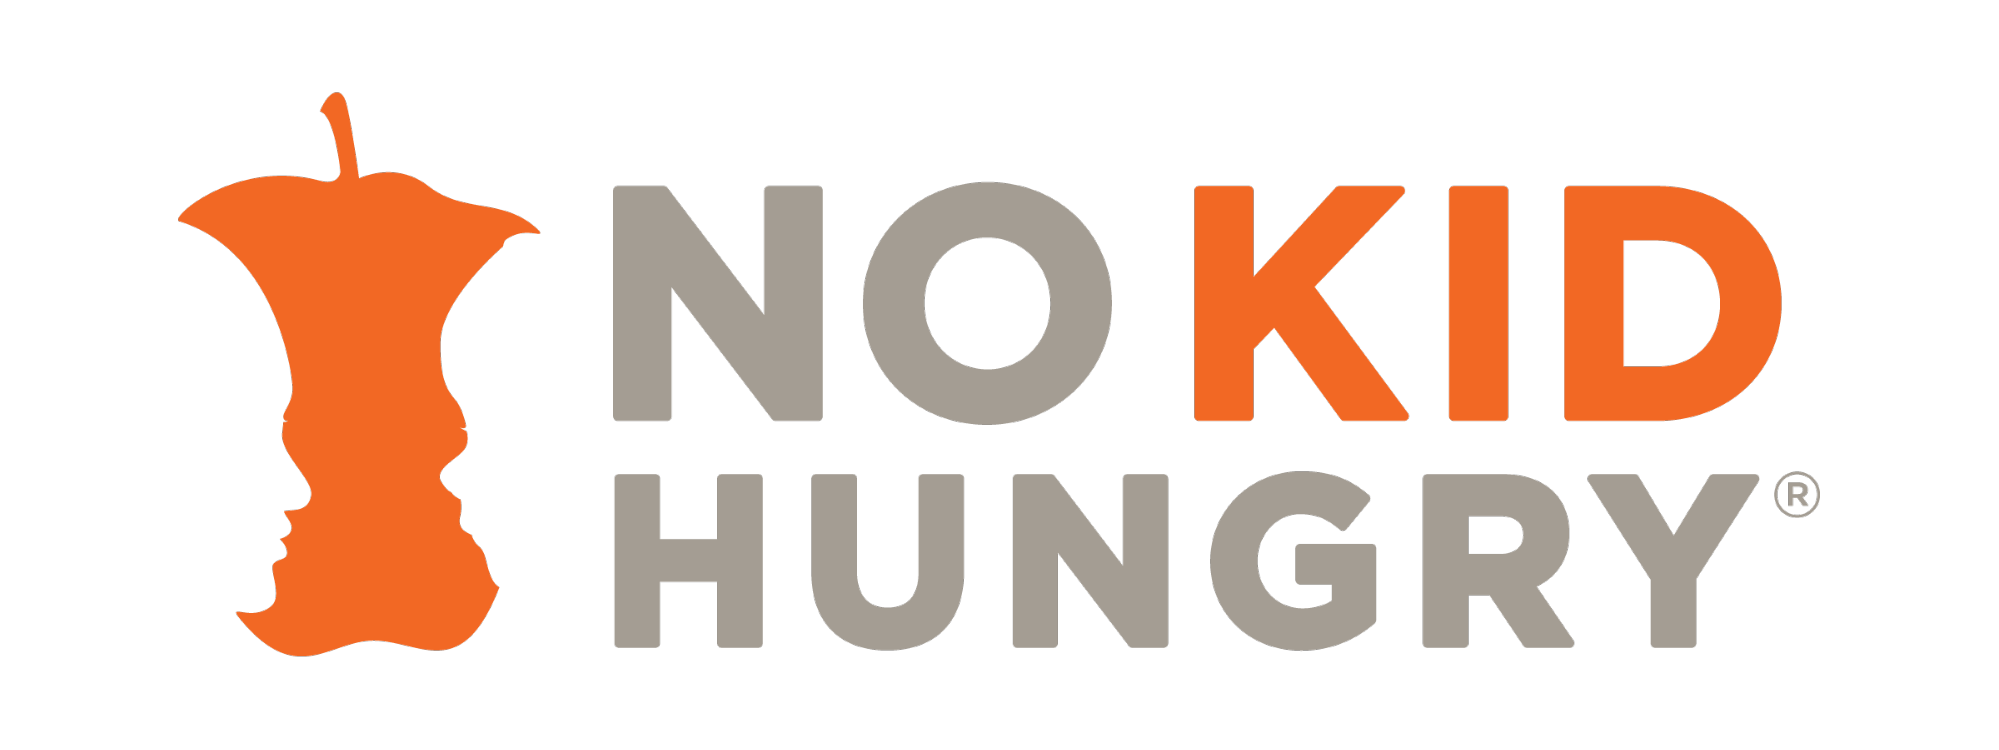 nokidhungry.png